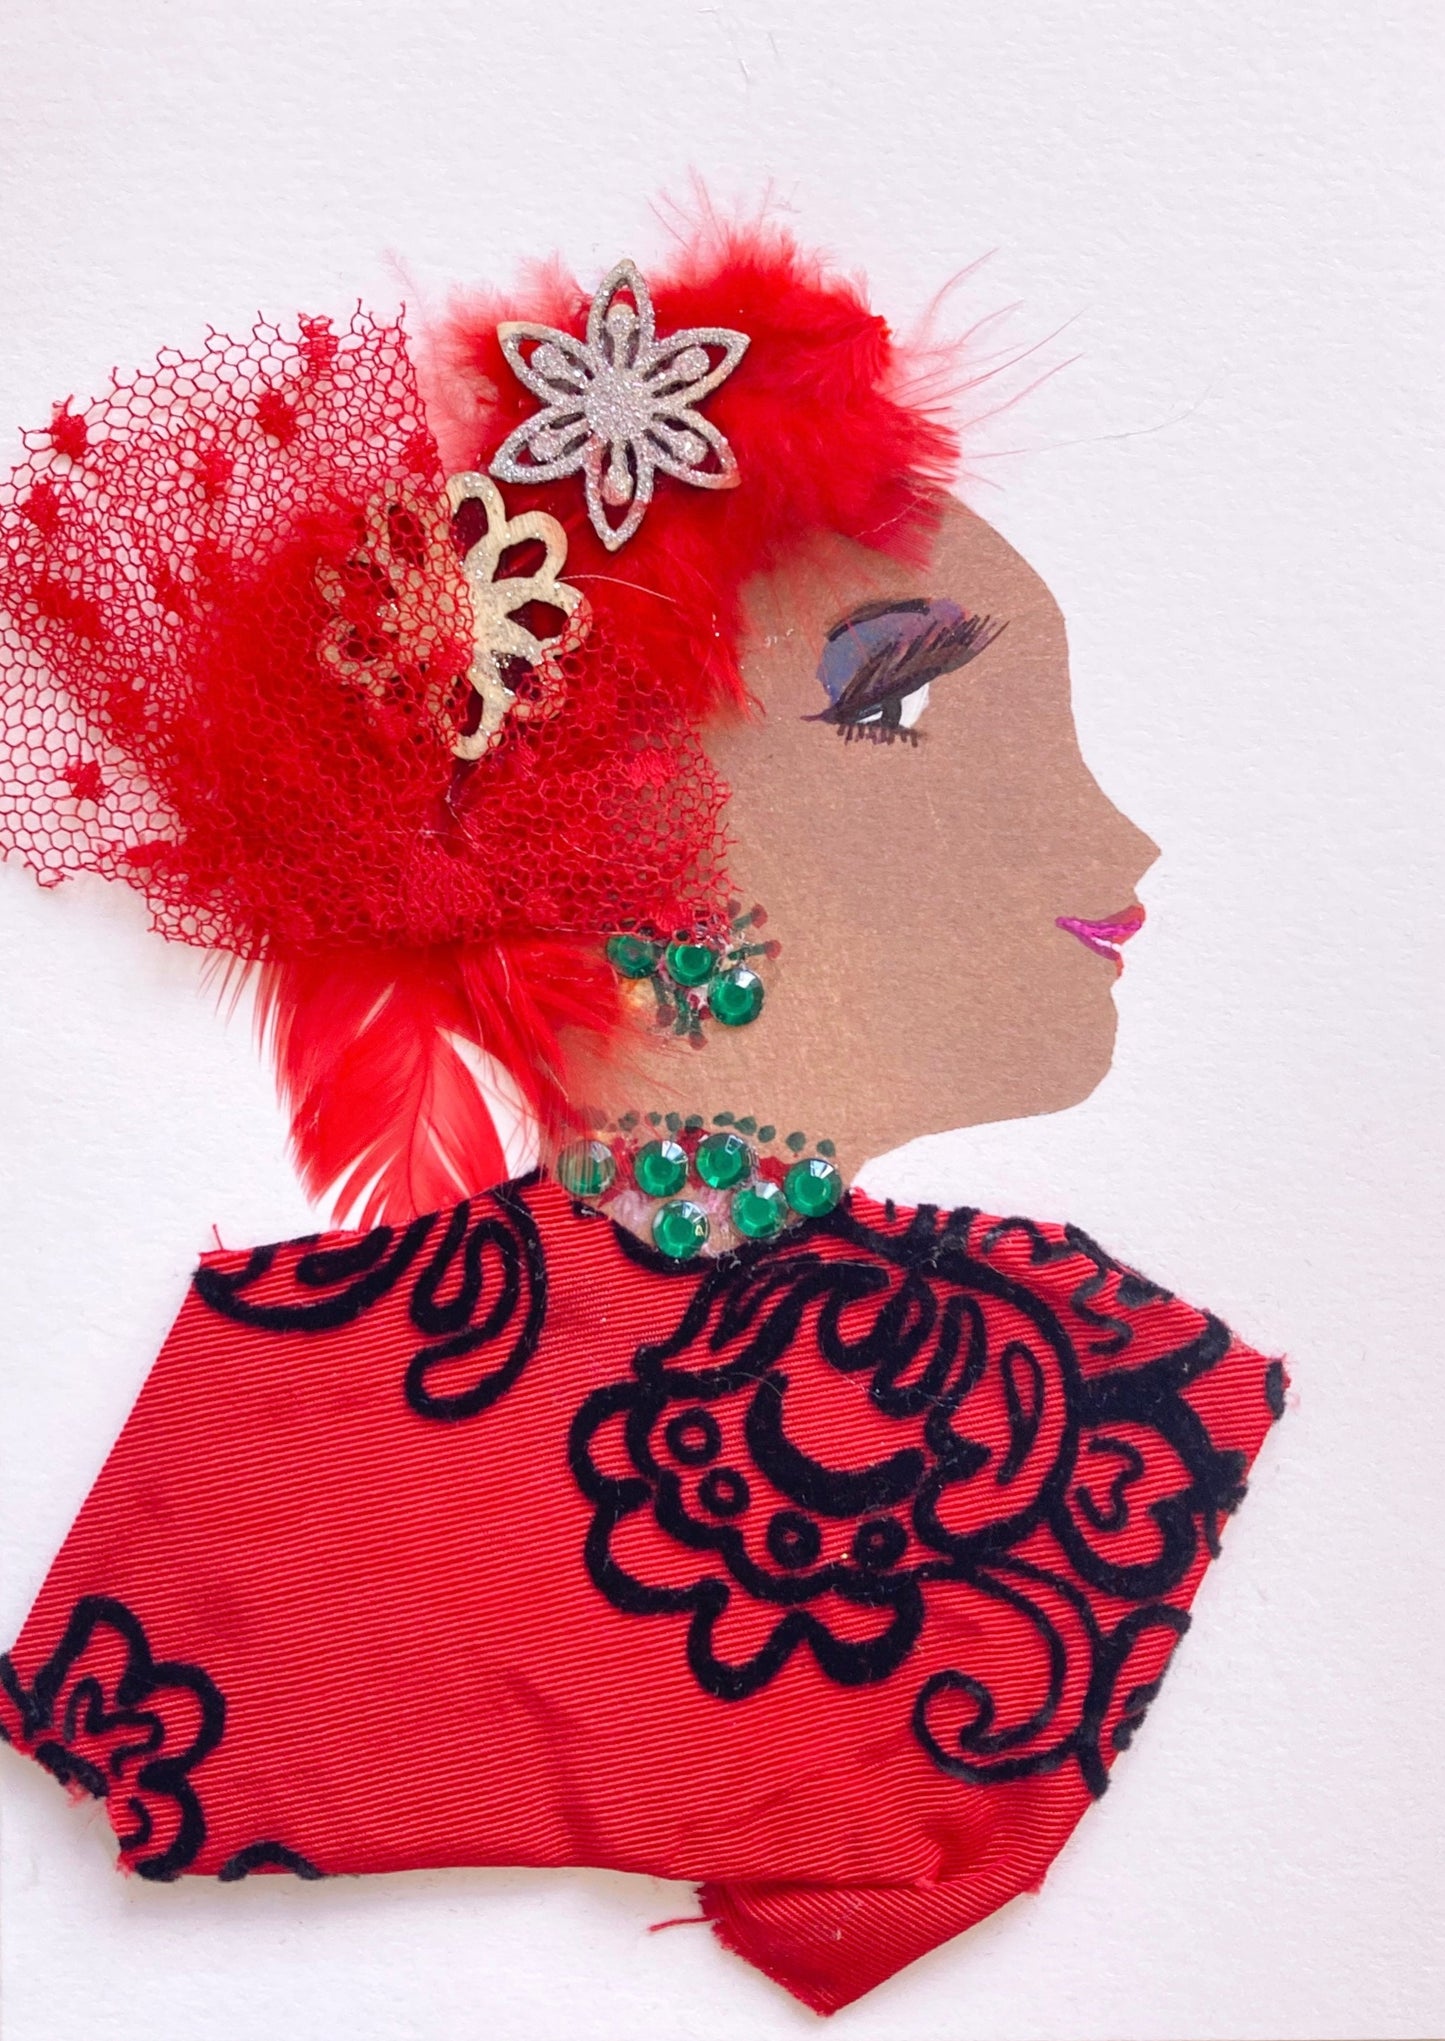 This card has been given the name Red Rebecca. Rebecca wears a blouse made of a red fabric with black embroidery. Her jewellery is green gems. She wears Flowers in her red feathery hair and a red mesh bow as well. 